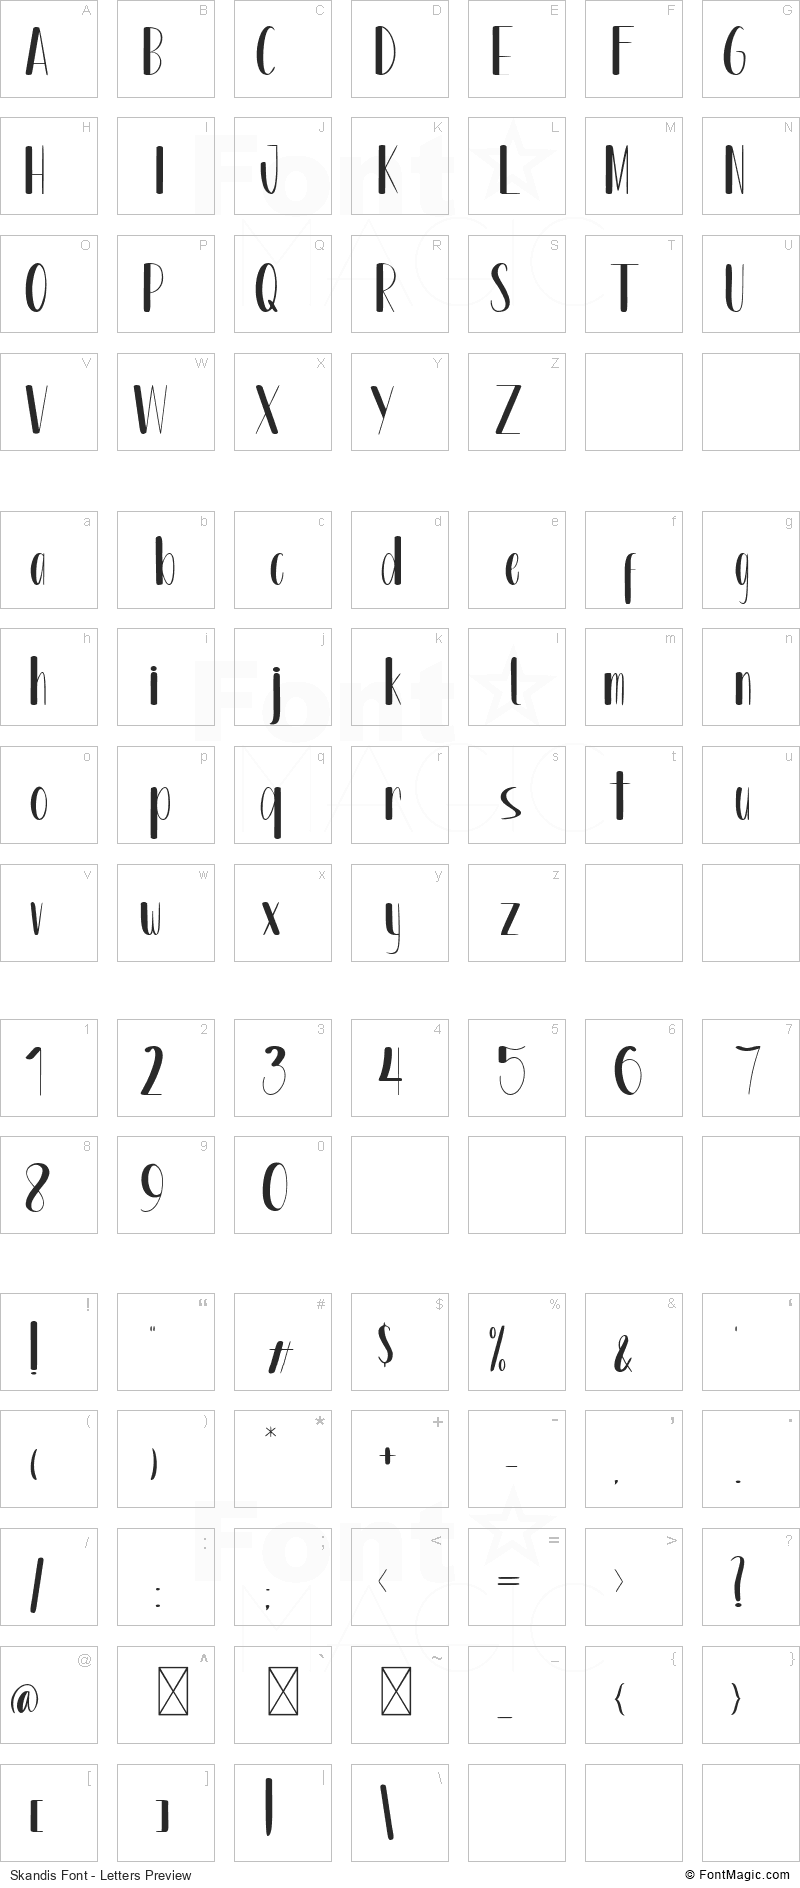 Skandis Font - All Latters Preview Chart